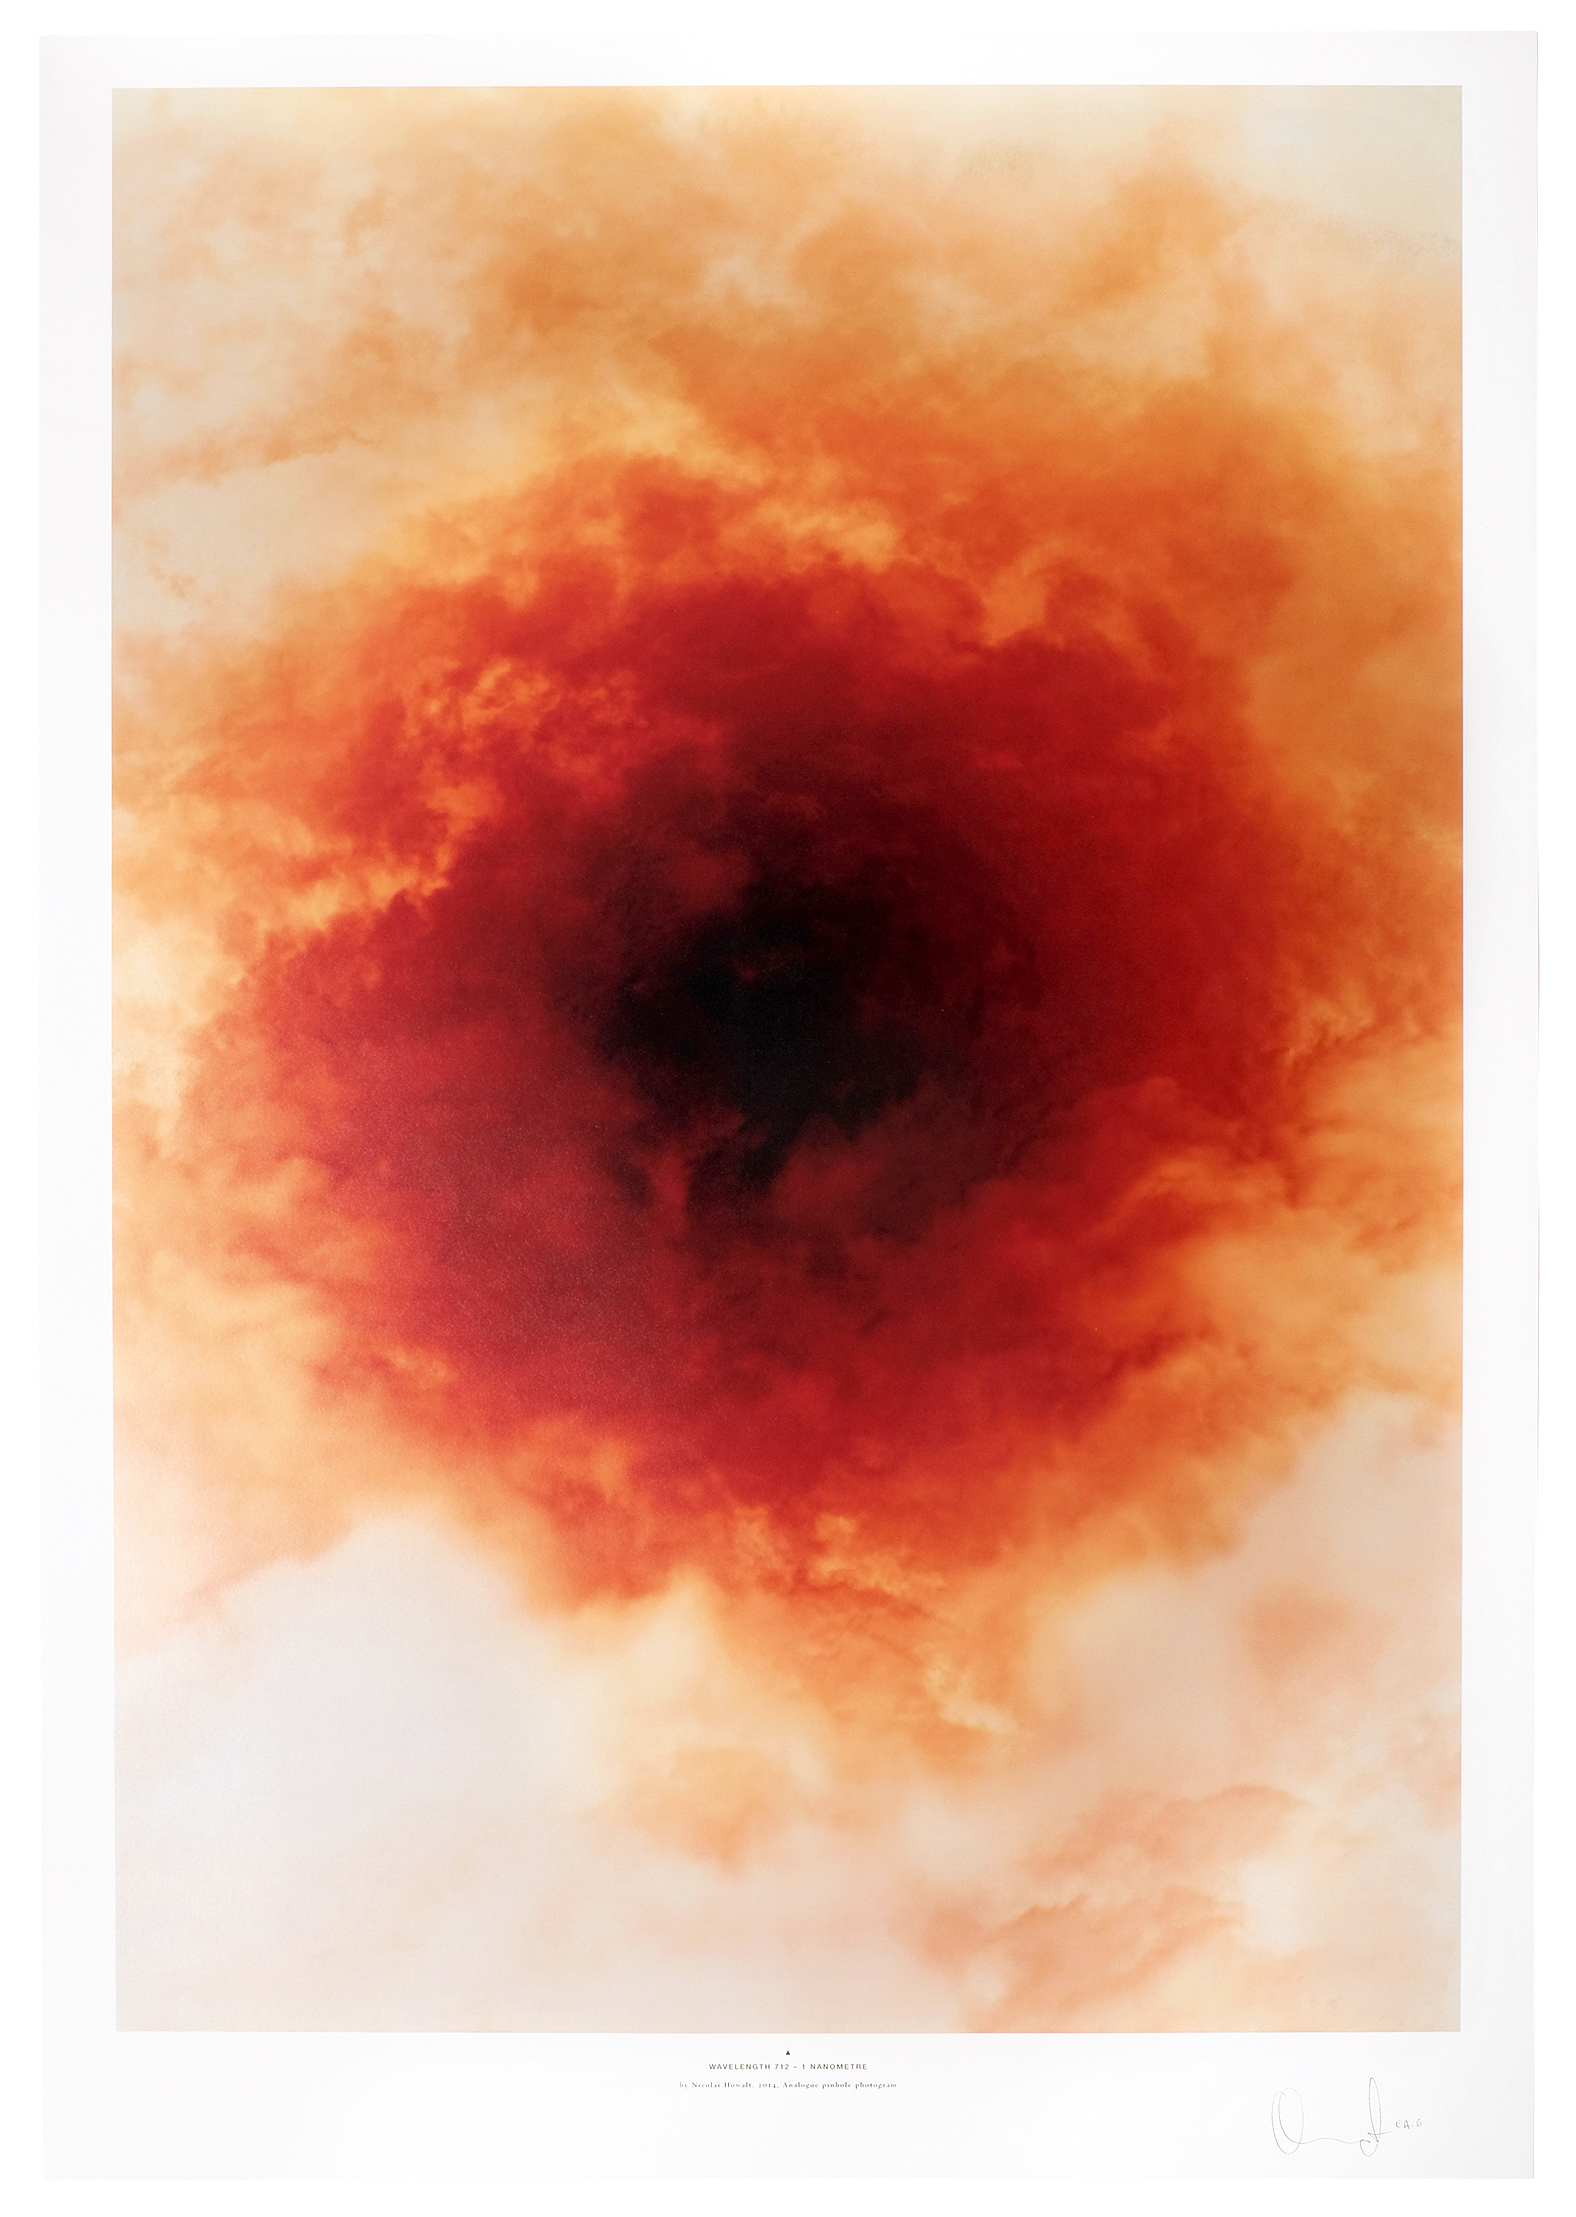 Limited edition poster by Nicolai HOWALT from his Light Break series